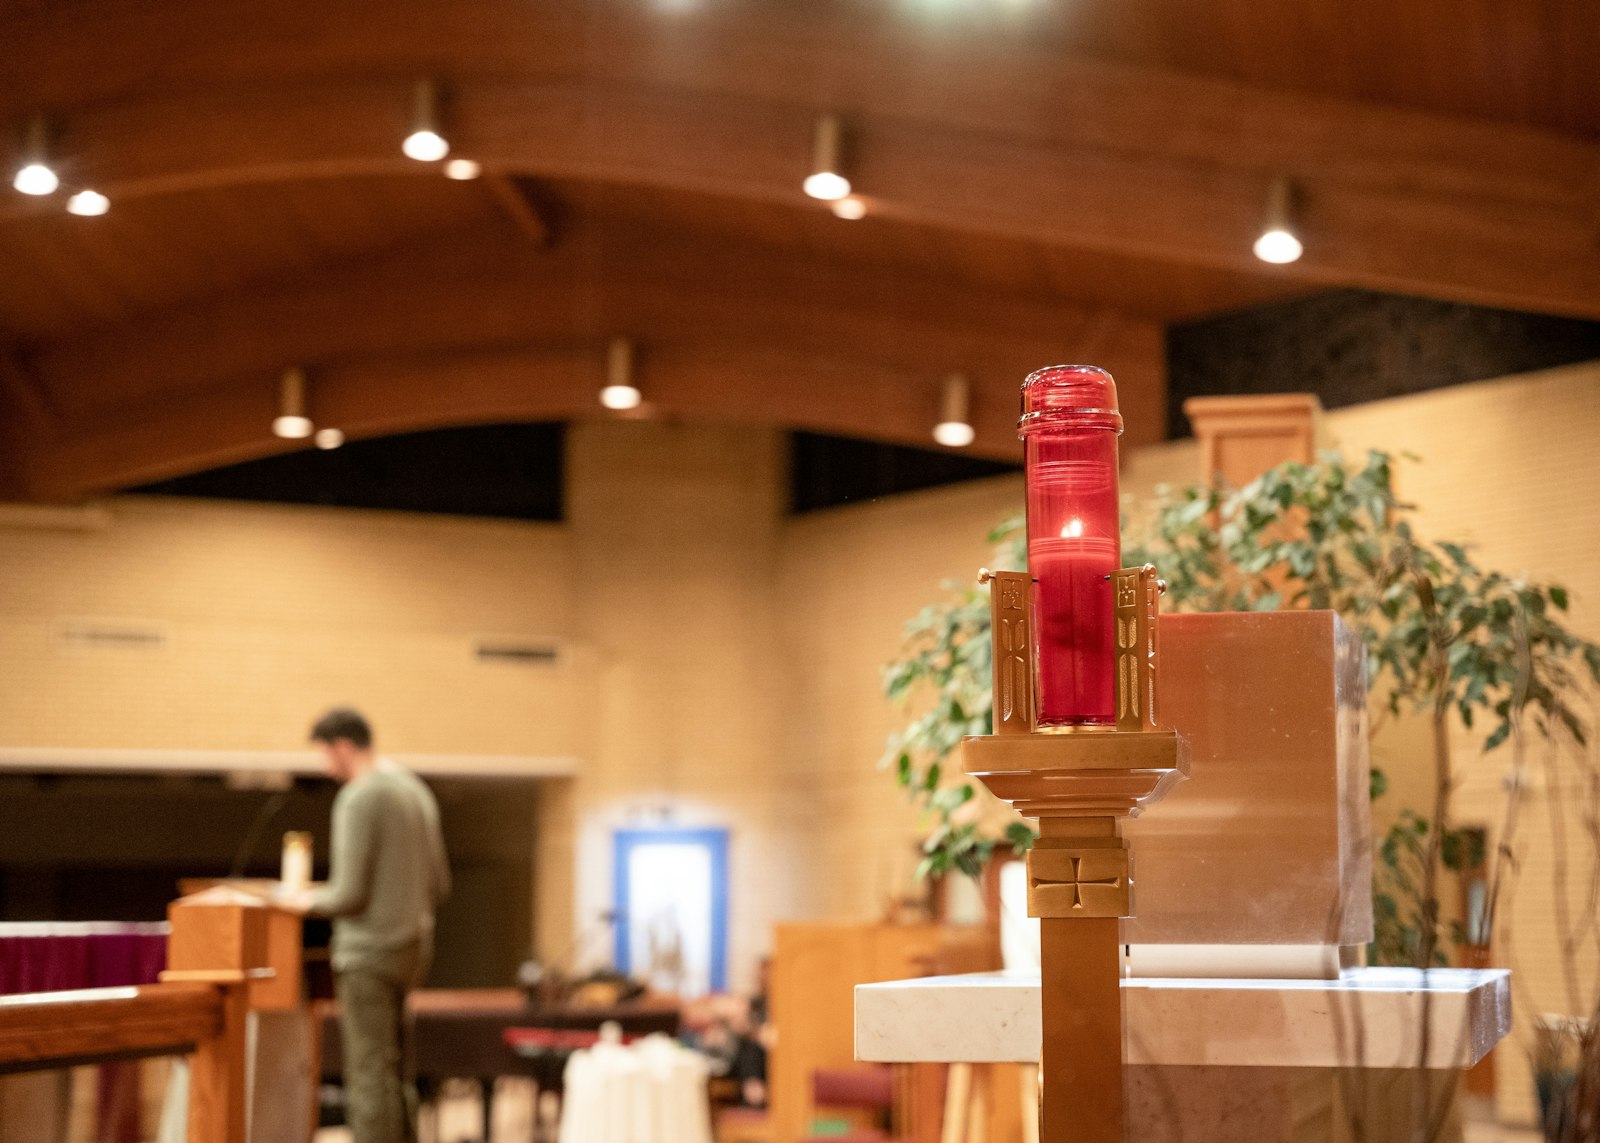 An image of the "ever-lit" flame signifying the presence of the Eucharist in the tabernacle, as Nick Switzer shares his testimony in the background.